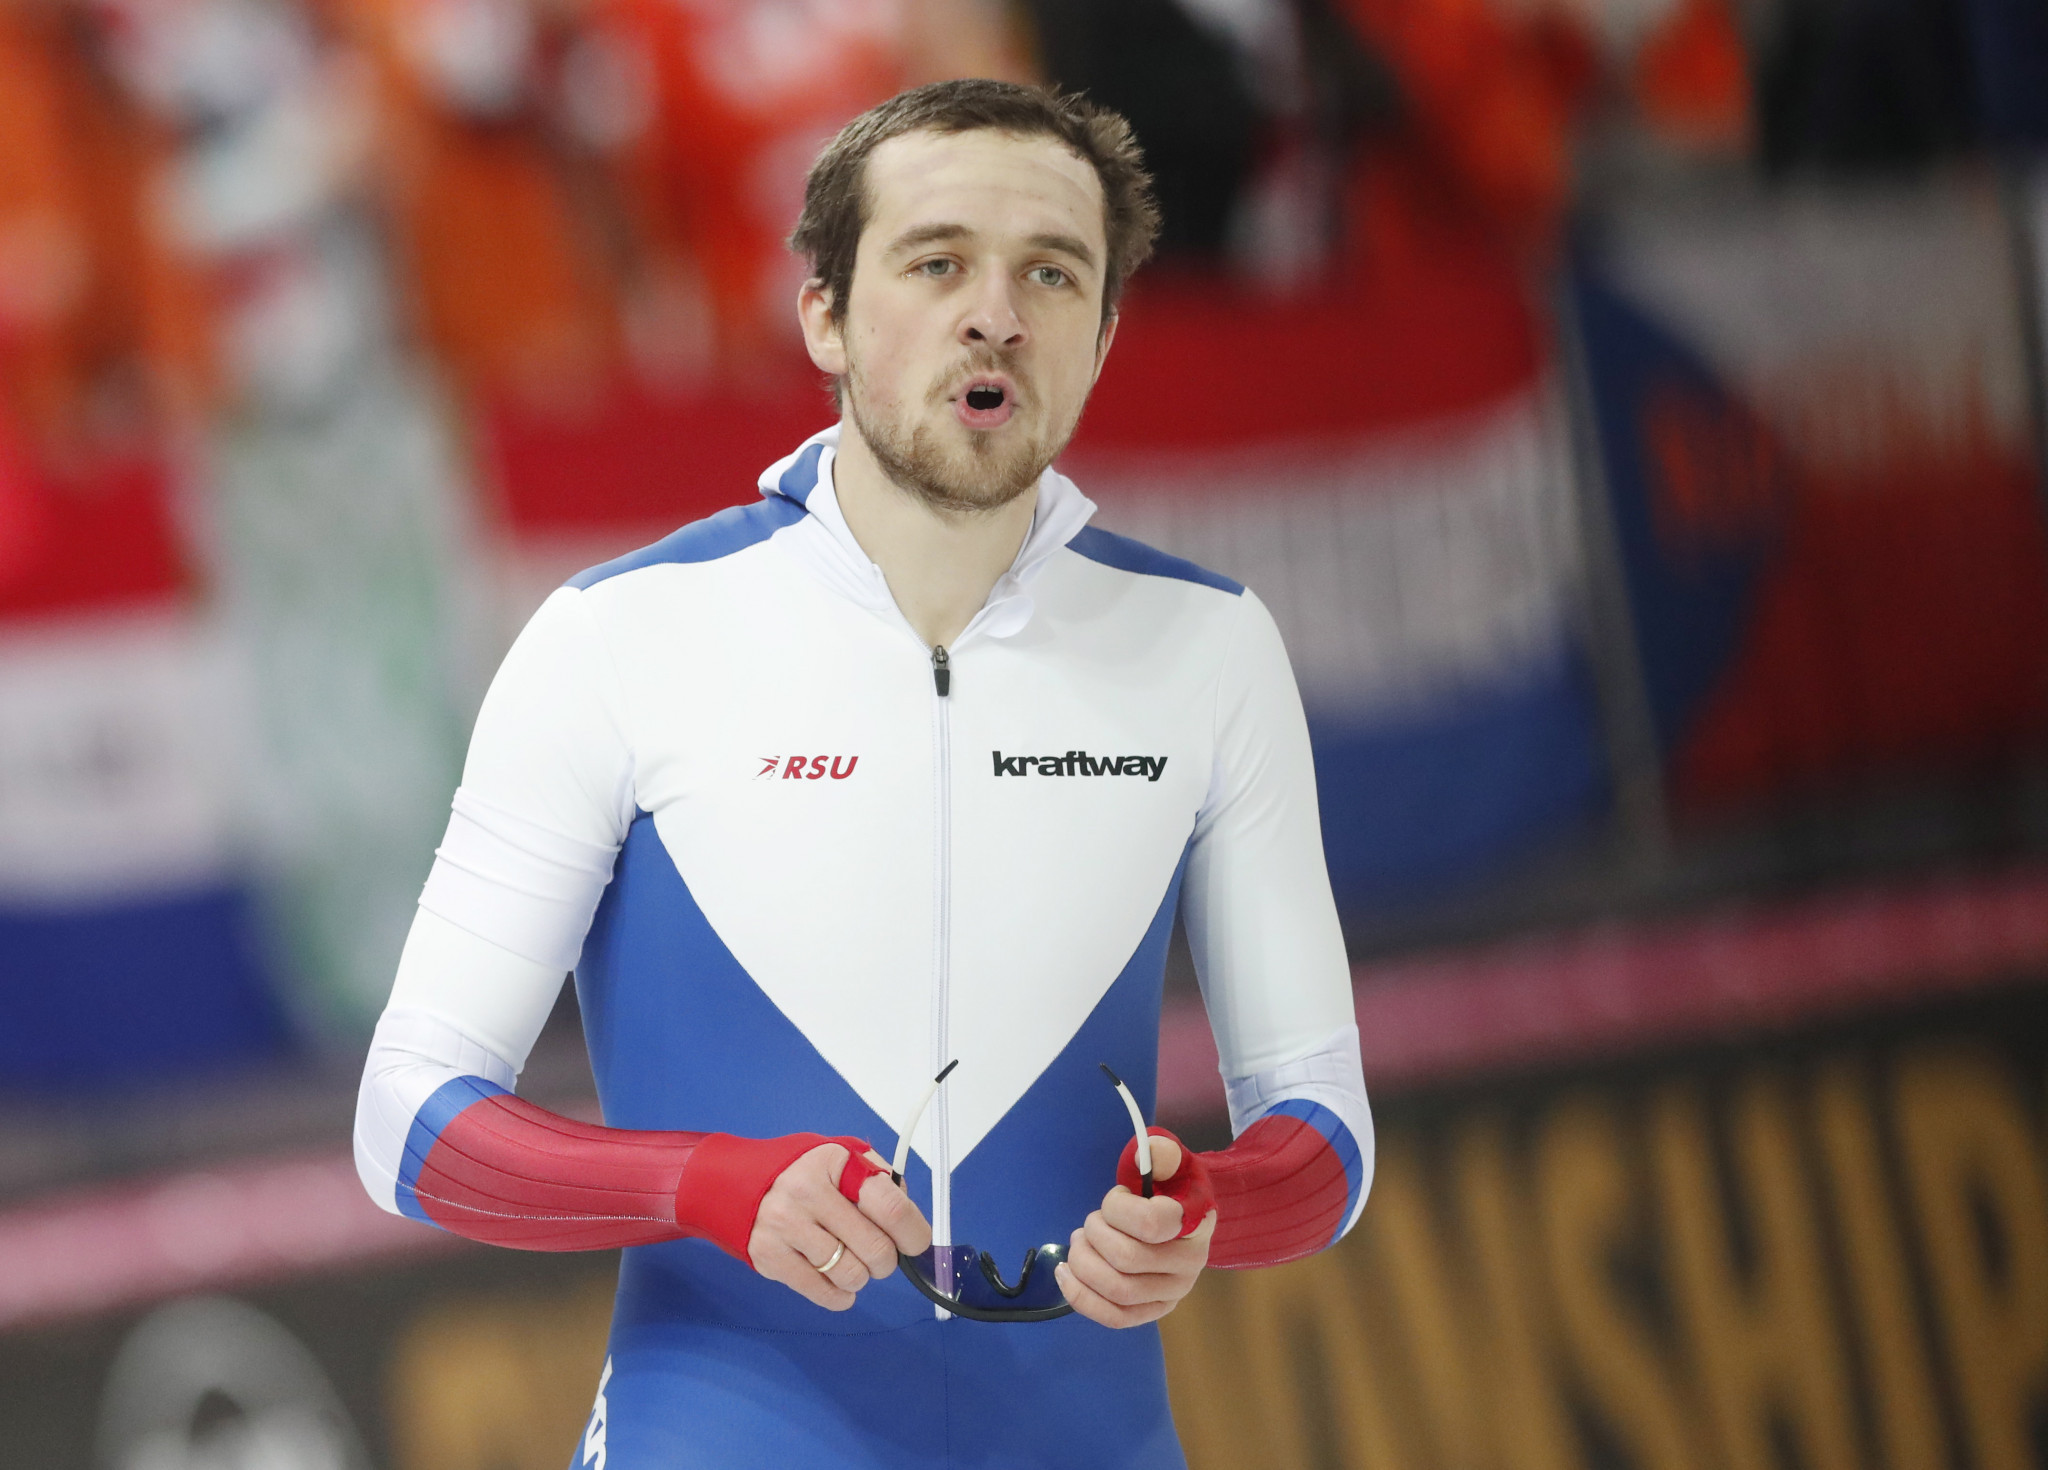 Denis Yuskov is reportedly among the athletes submitted to the IOC